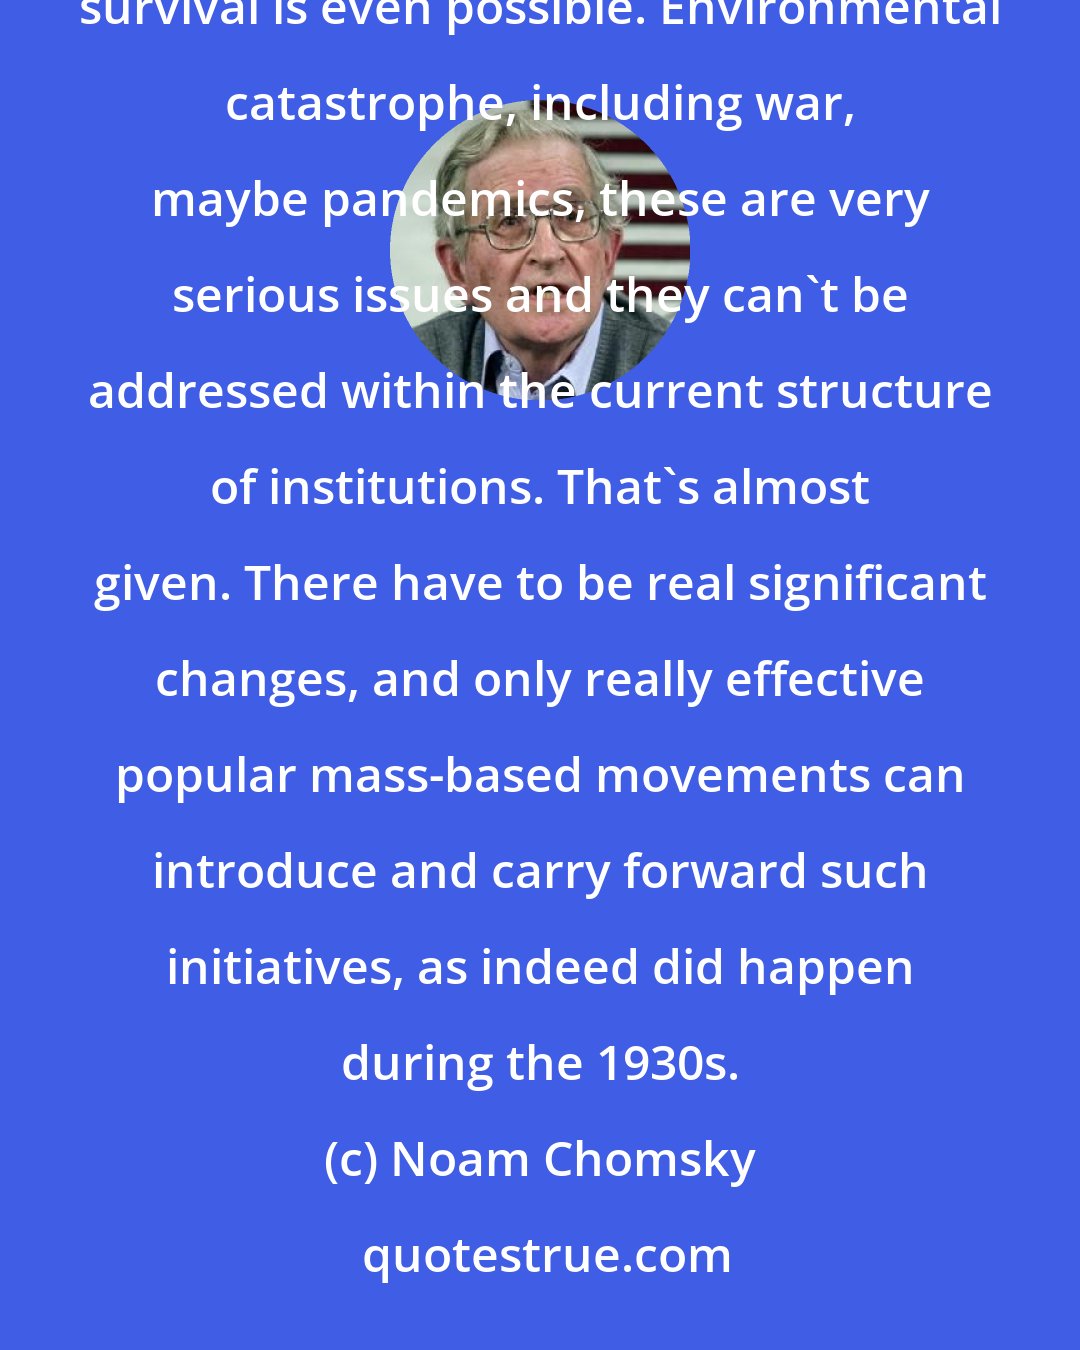 Noam Chomsky: The human species is now at a point where it has to make choices that are going to determine whether decent survival is even possible. Environmental catastrophe, including war, maybe pandemics, these are very serious issues and they can't be addressed within the current structure of institutions. That's almost given. There have to be real significant changes, and only really effective popular mass-based movements can introduce and carry forward such initiatives, as indeed did happen during the 1930s.